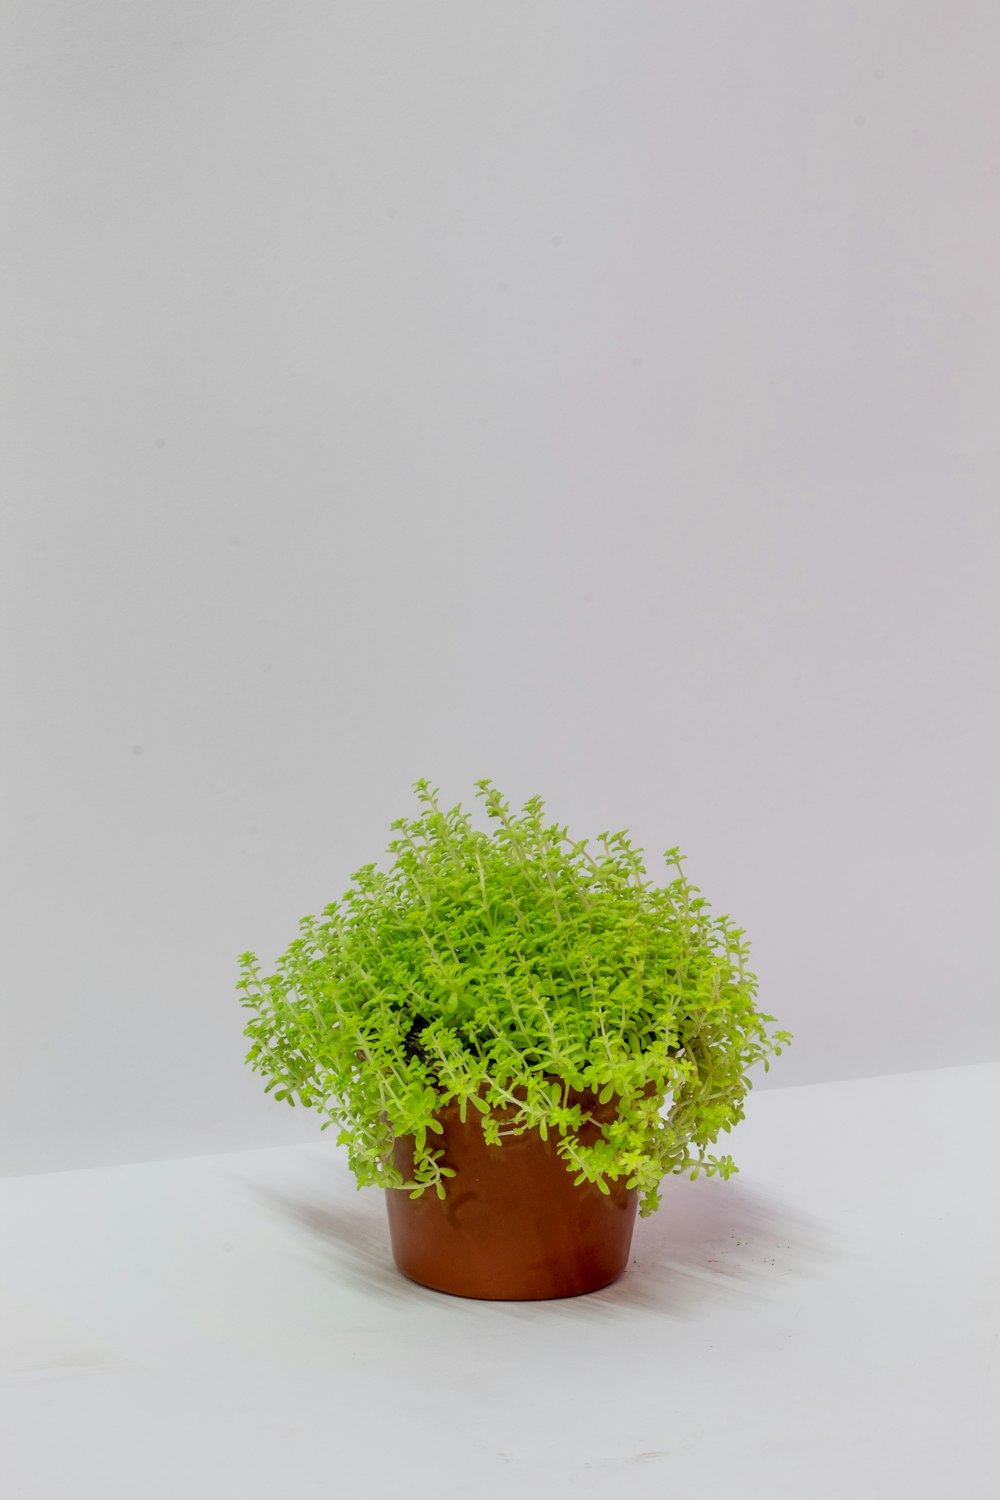 a small green plant in a brown pot